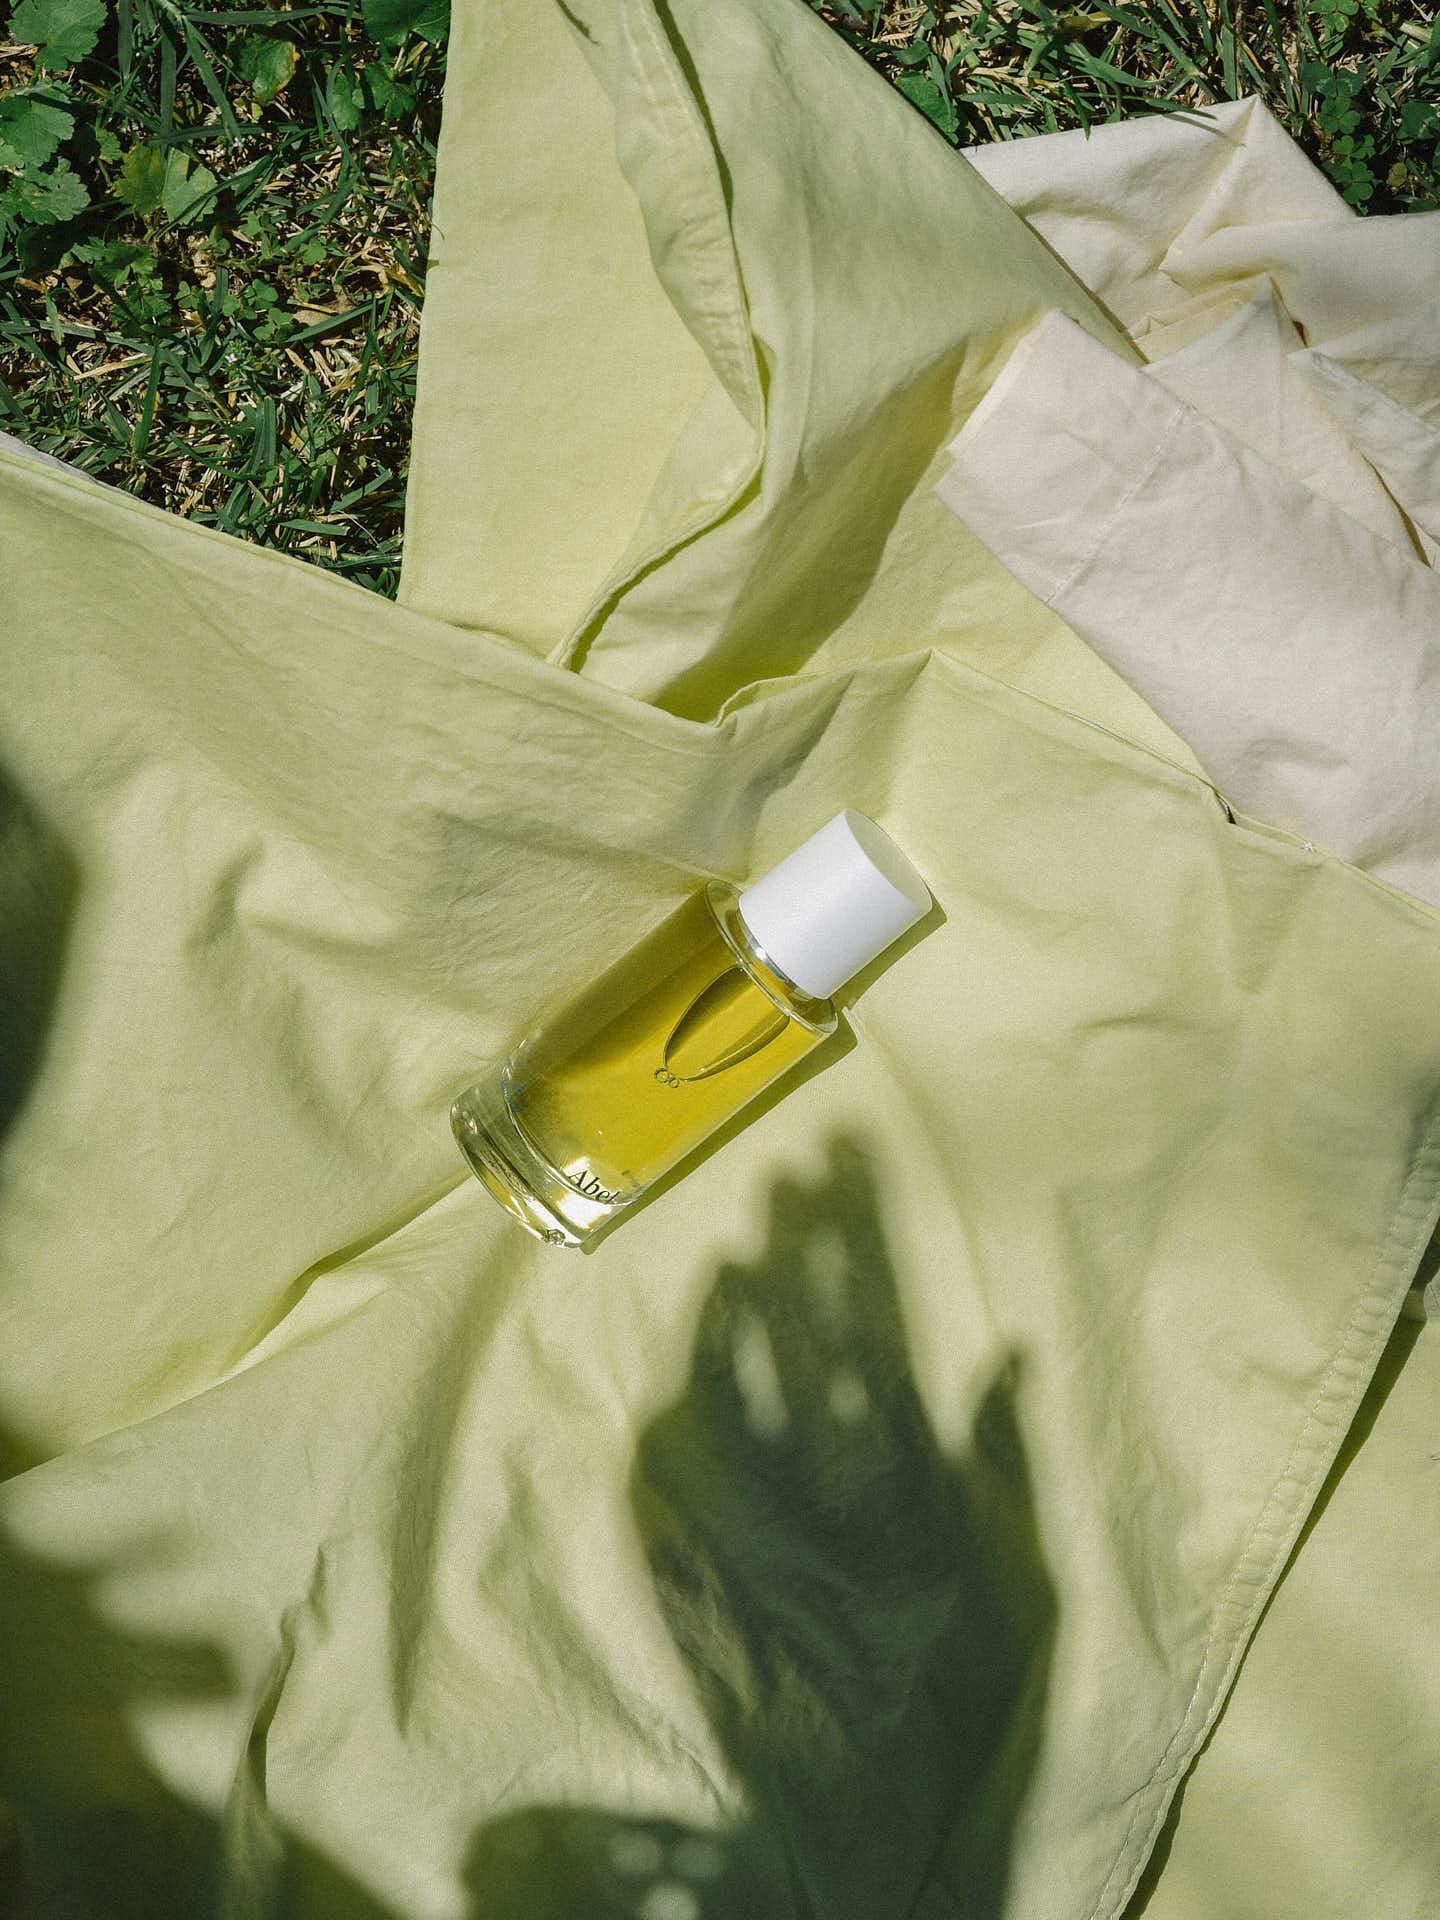 A clear glass bottle of Laundry Day – a verdant, sun-filled citrus by Abel with a white cap is placed on a light green cloth on grass, with shadows of hands visible on the cloth. The fragrance is 100% natural and ethically sourced.